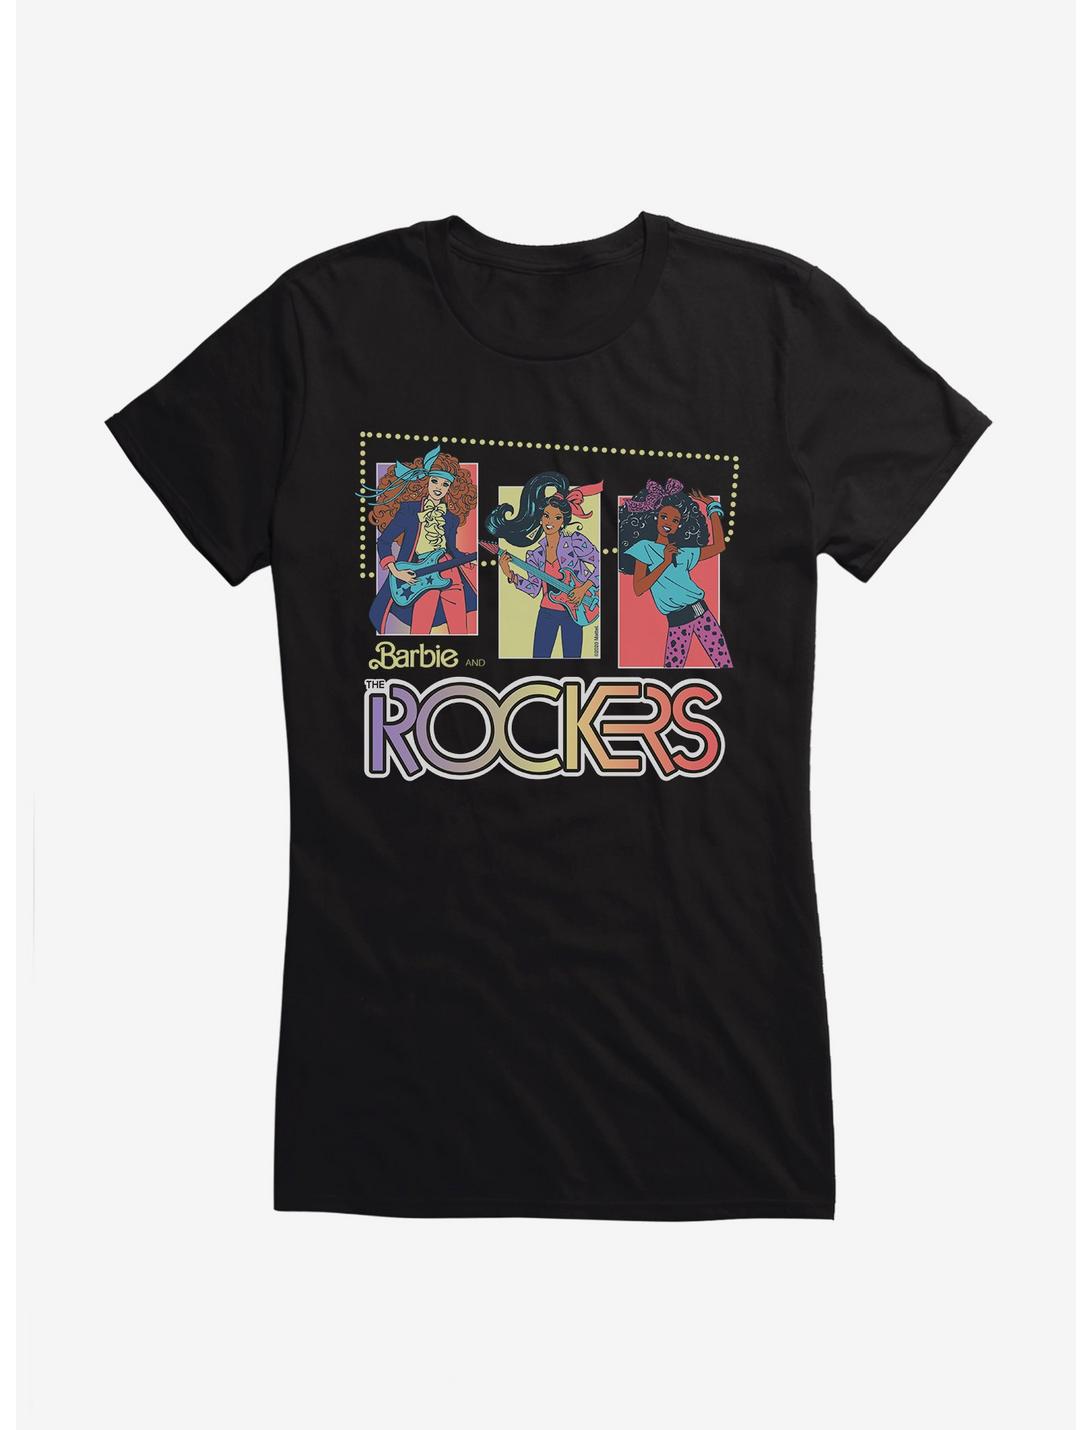 Barbie And The Rockers 80's Gradient Girls T-Shirt, BLACK, hi-res